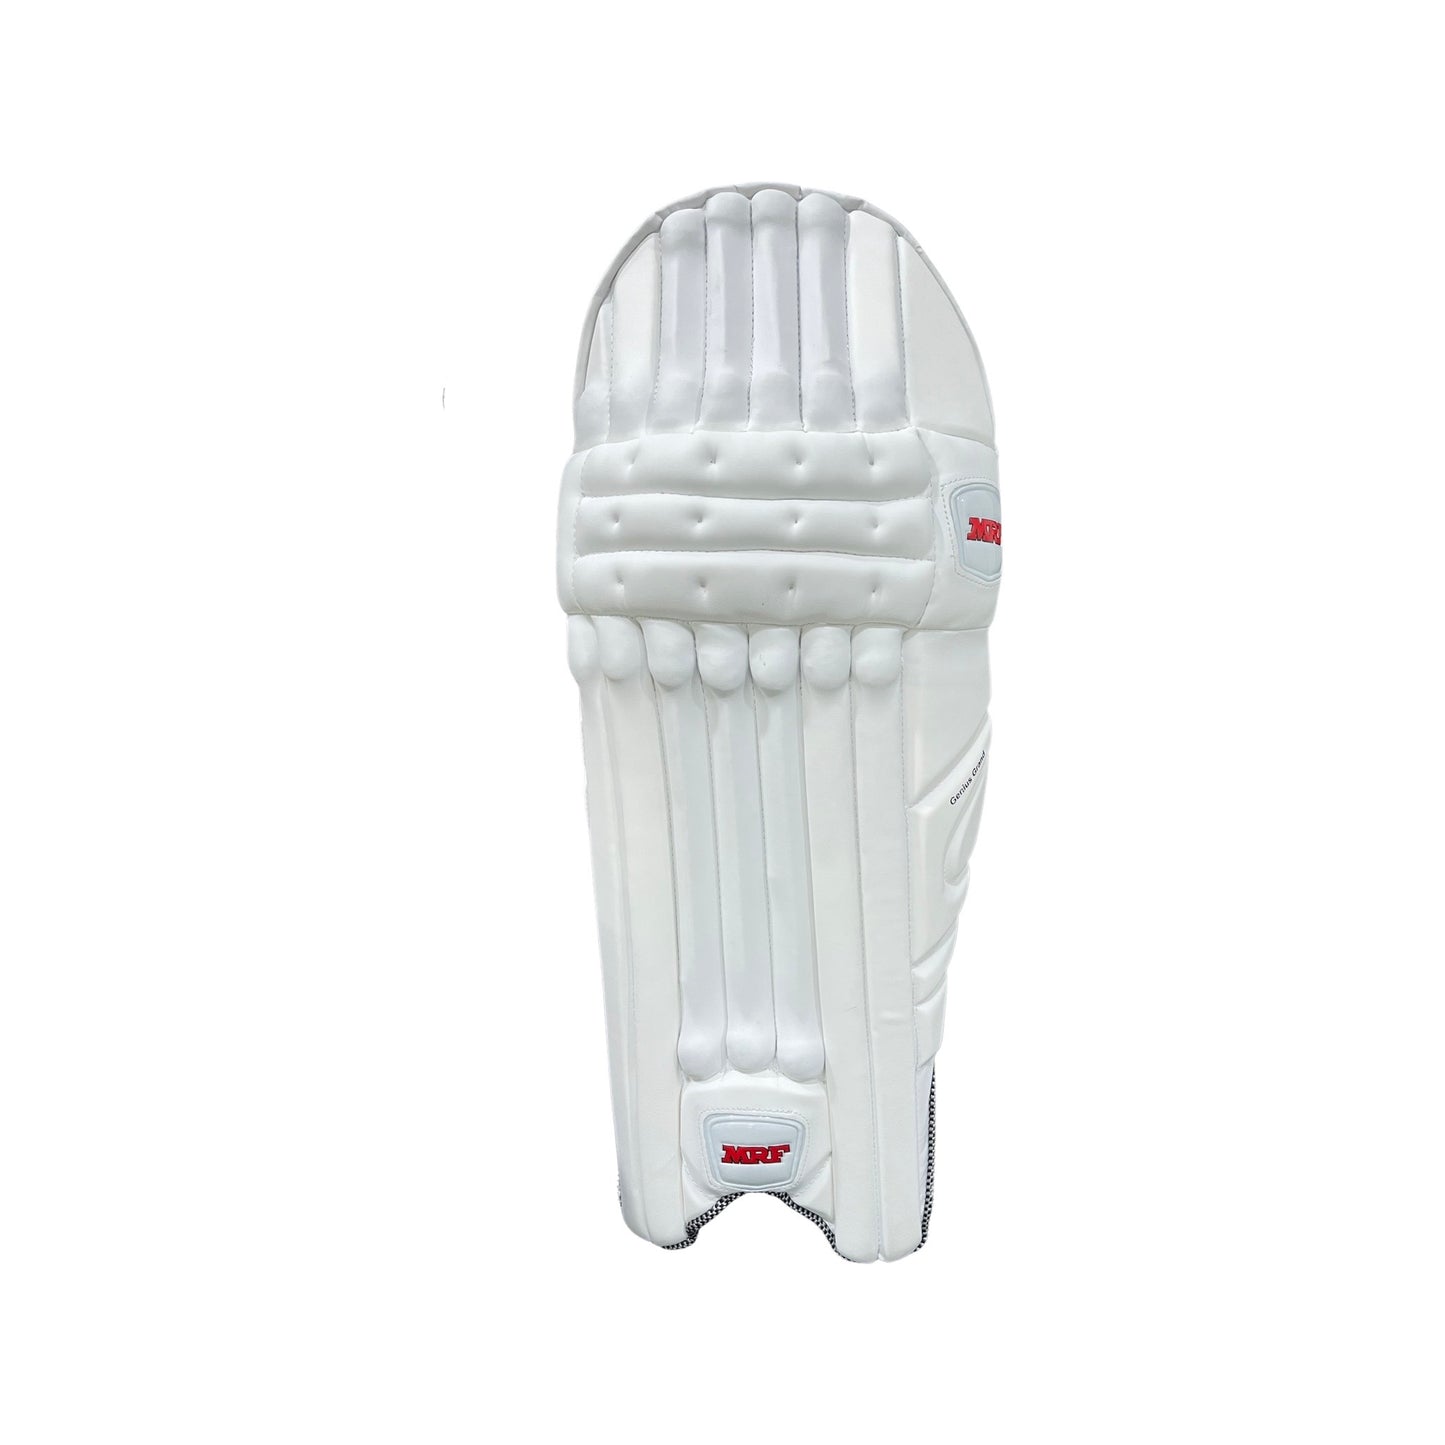 MRF Junior English Willow Genius Grand Cricket Kit Complete Set with Bat, Kit Bag, Gloves, Guards & Accessories